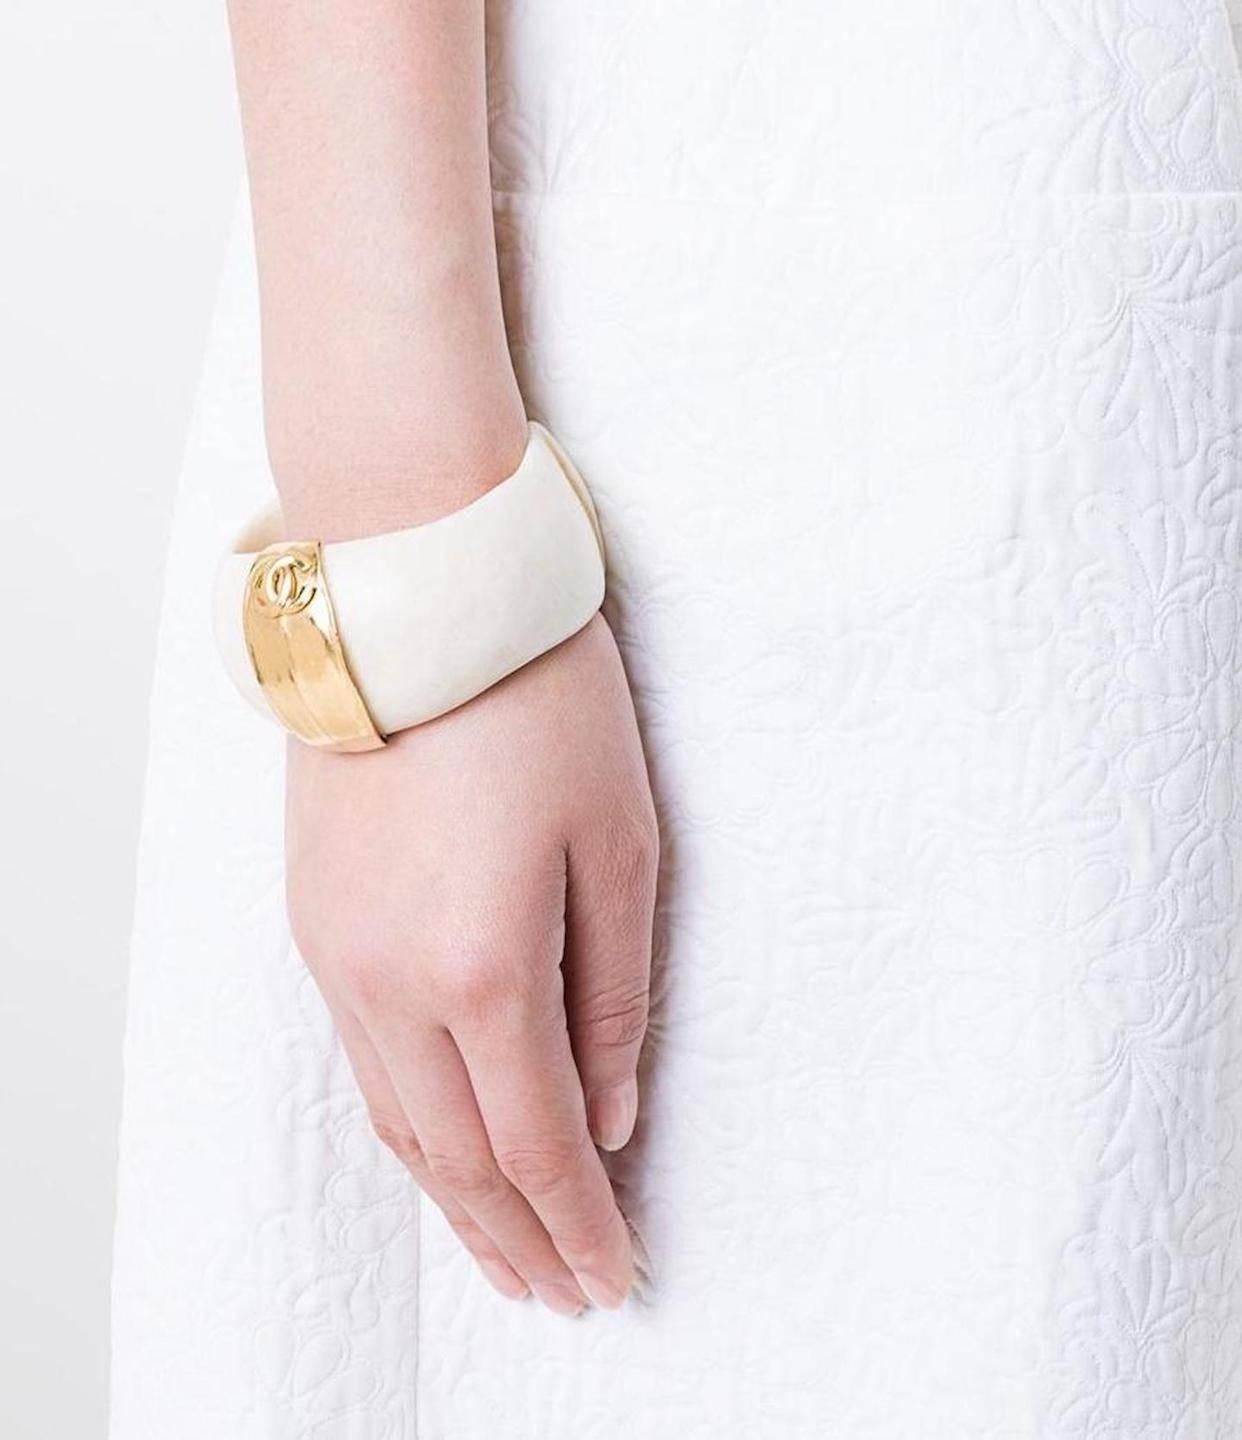 Chanel Rare Vintage Ivory Gold Charm Evening Cuff Bracelet 
Resin
Metal
Gold tone
Slip on 
Made in France
Width 1.5